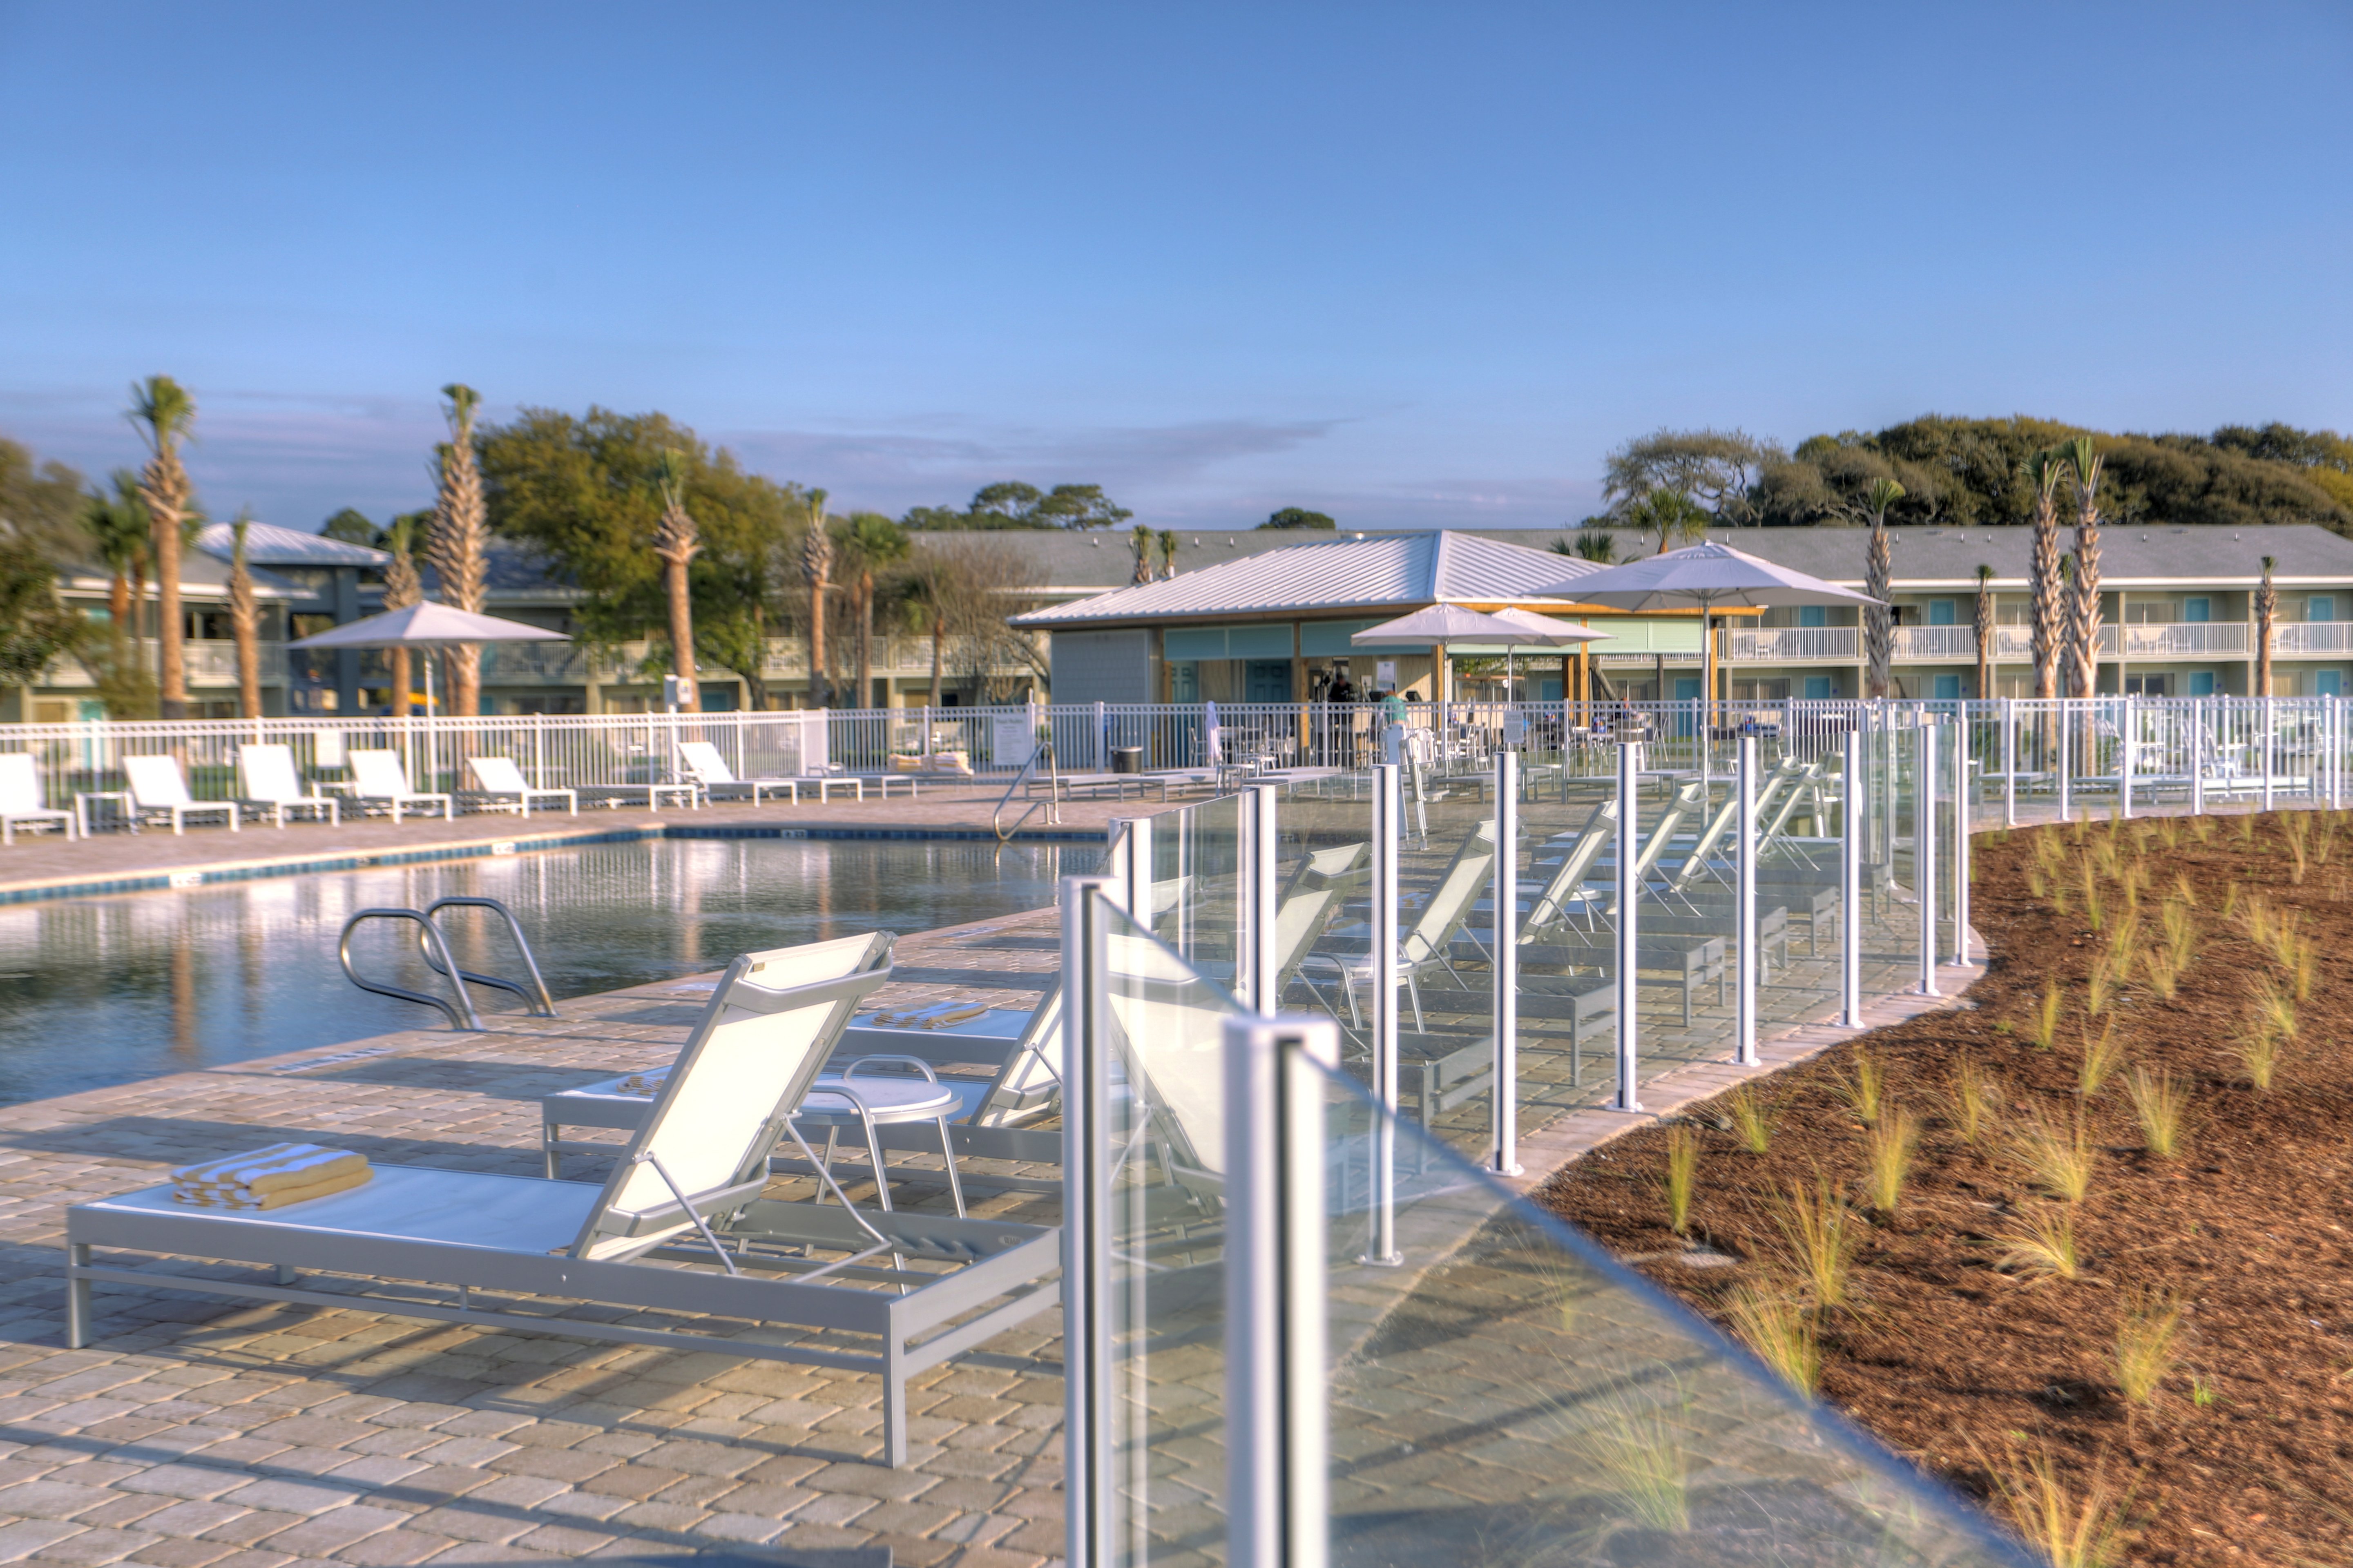 Take a dip in our beachfront swimming pool!